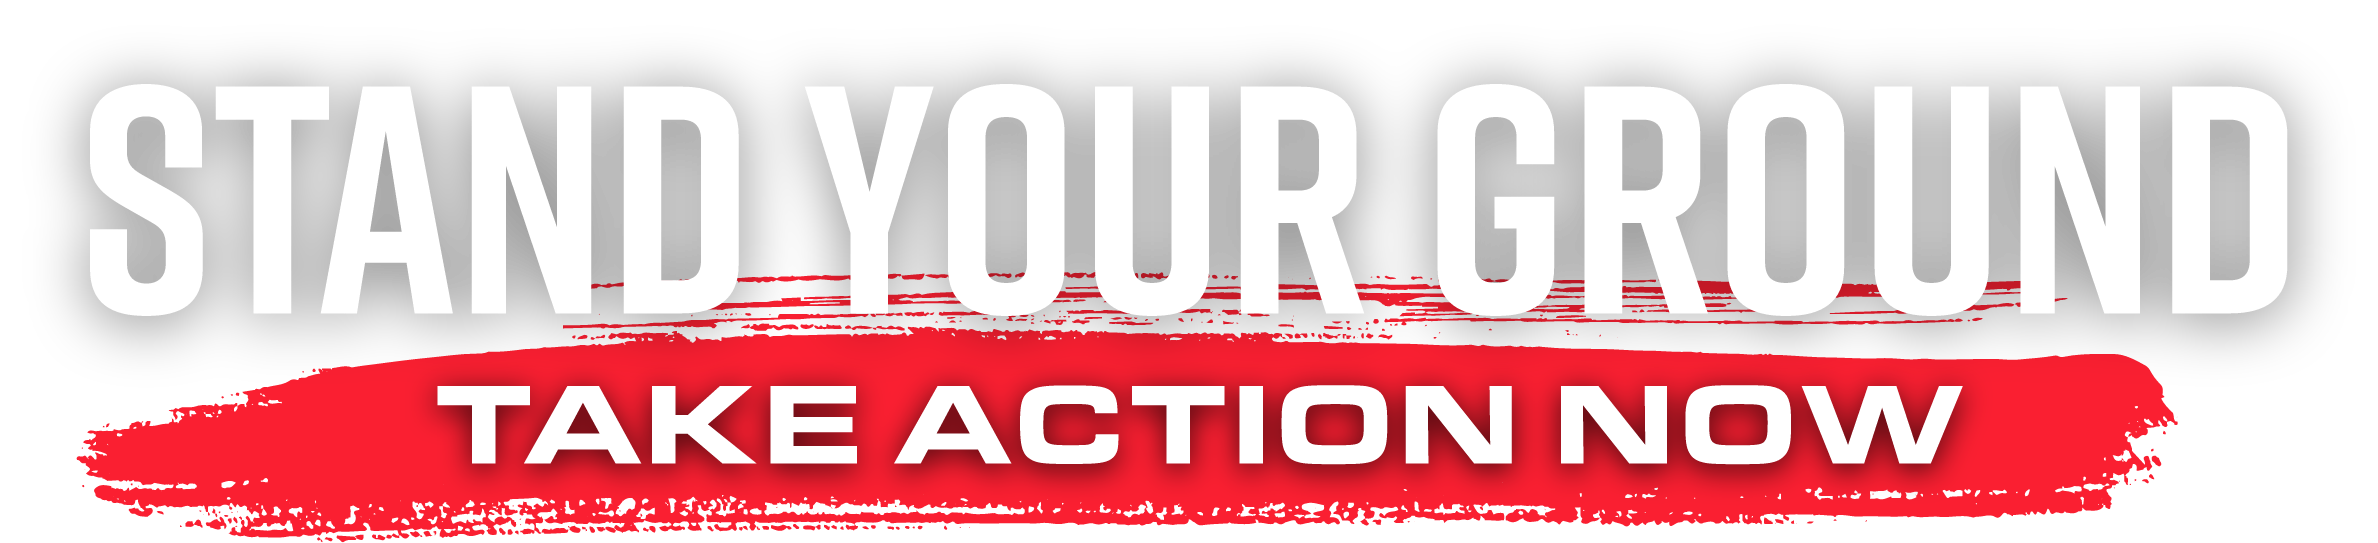 Stand Your Ground - Take Action Now